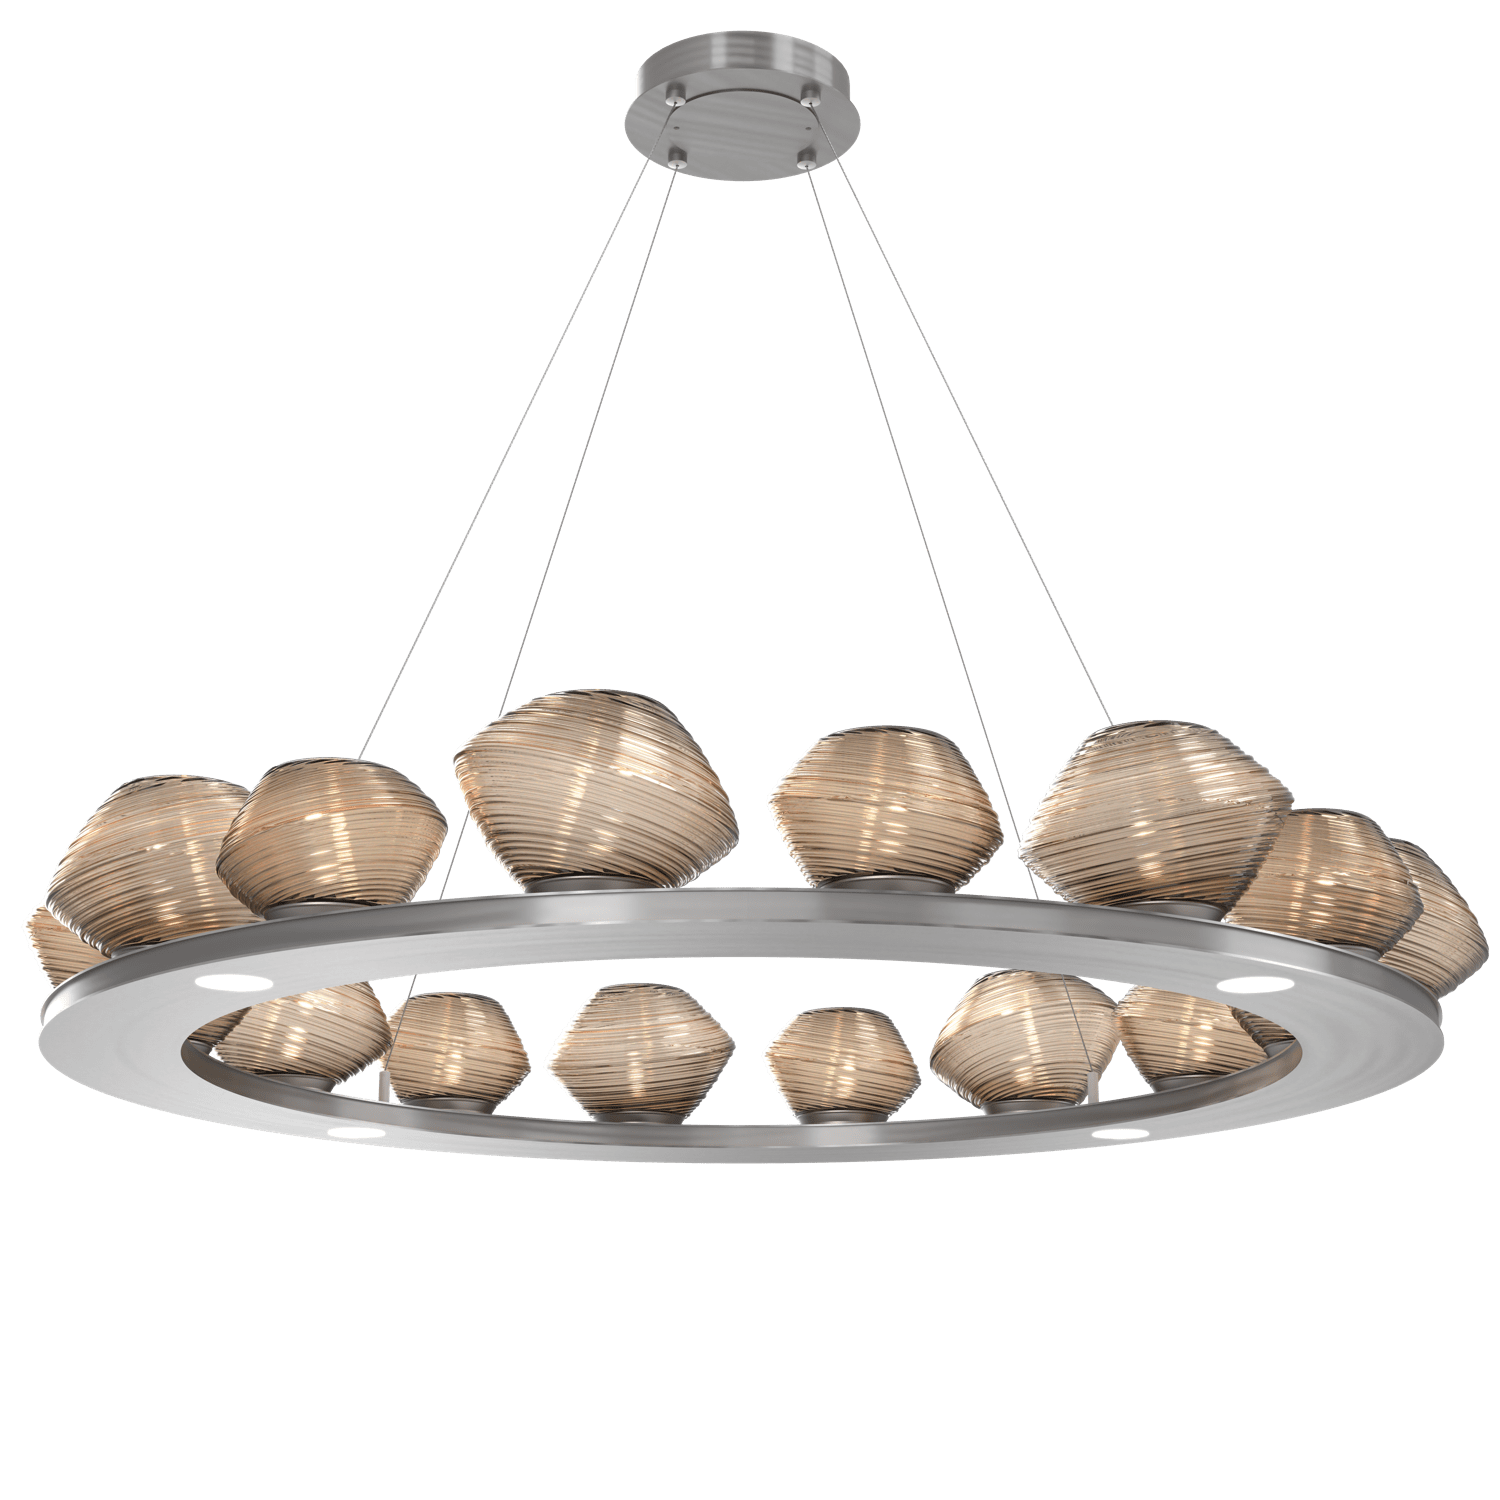 CHB0089-0D-SN-B-Hammerton-Studio-Mesa-48-inch-ring-chandelier-with-satin-nickel-finish-and-bronze-blown-glass-shades-and-LED-lamping